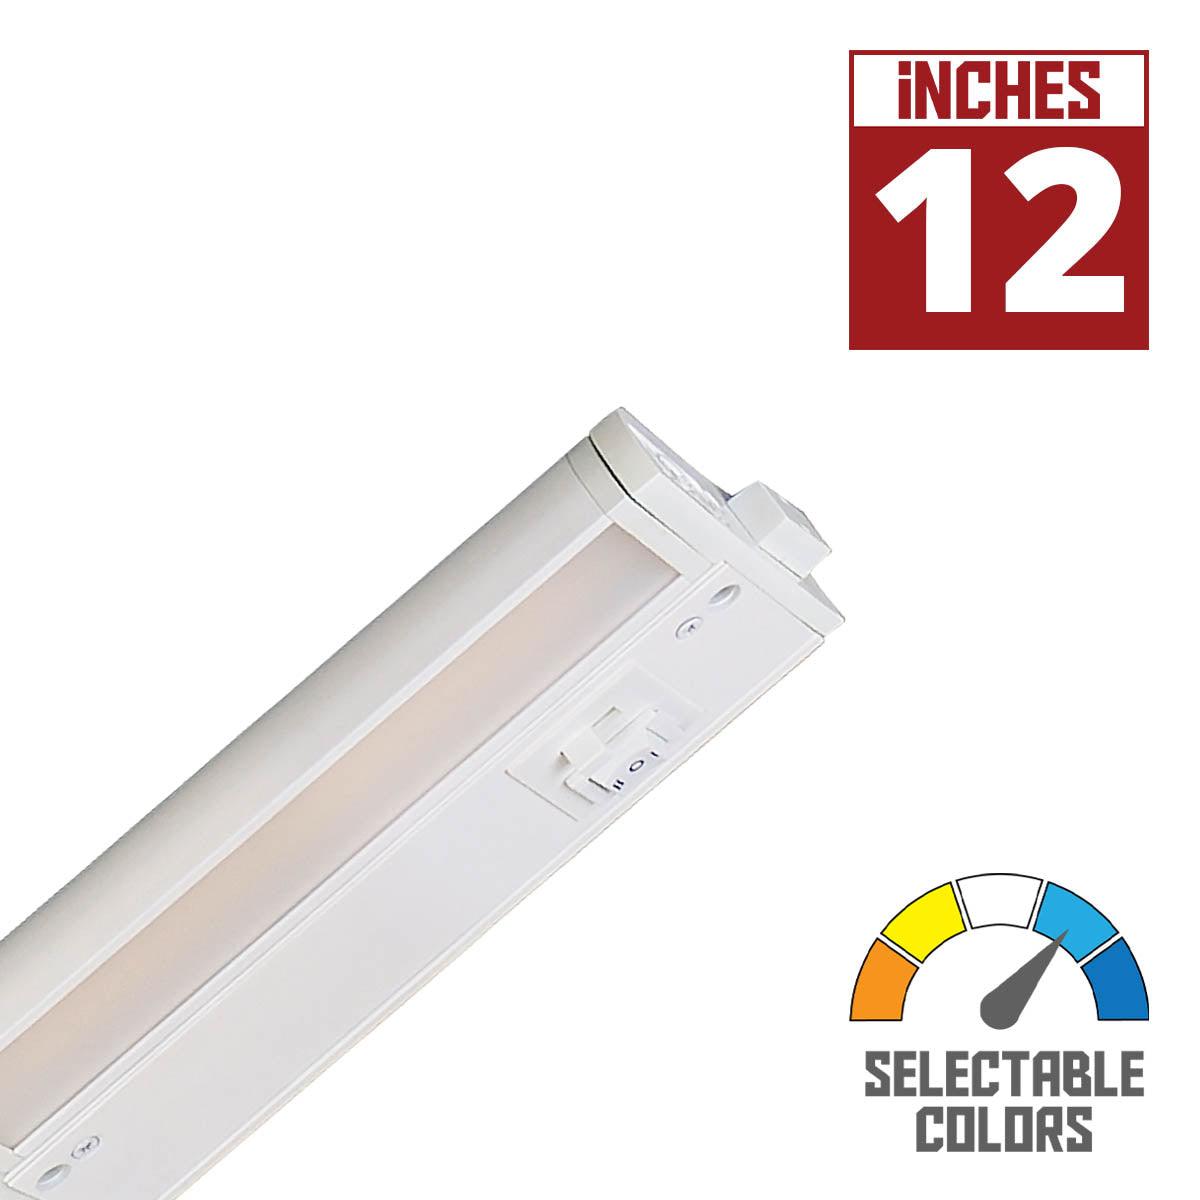 CounterMax 5K 12 Inch Under Cabinet LED Light with Patent gimbals, 720 Lumens, Linkable, CCT Selectable 2700K to 5000K, 120V - Bees Lighting